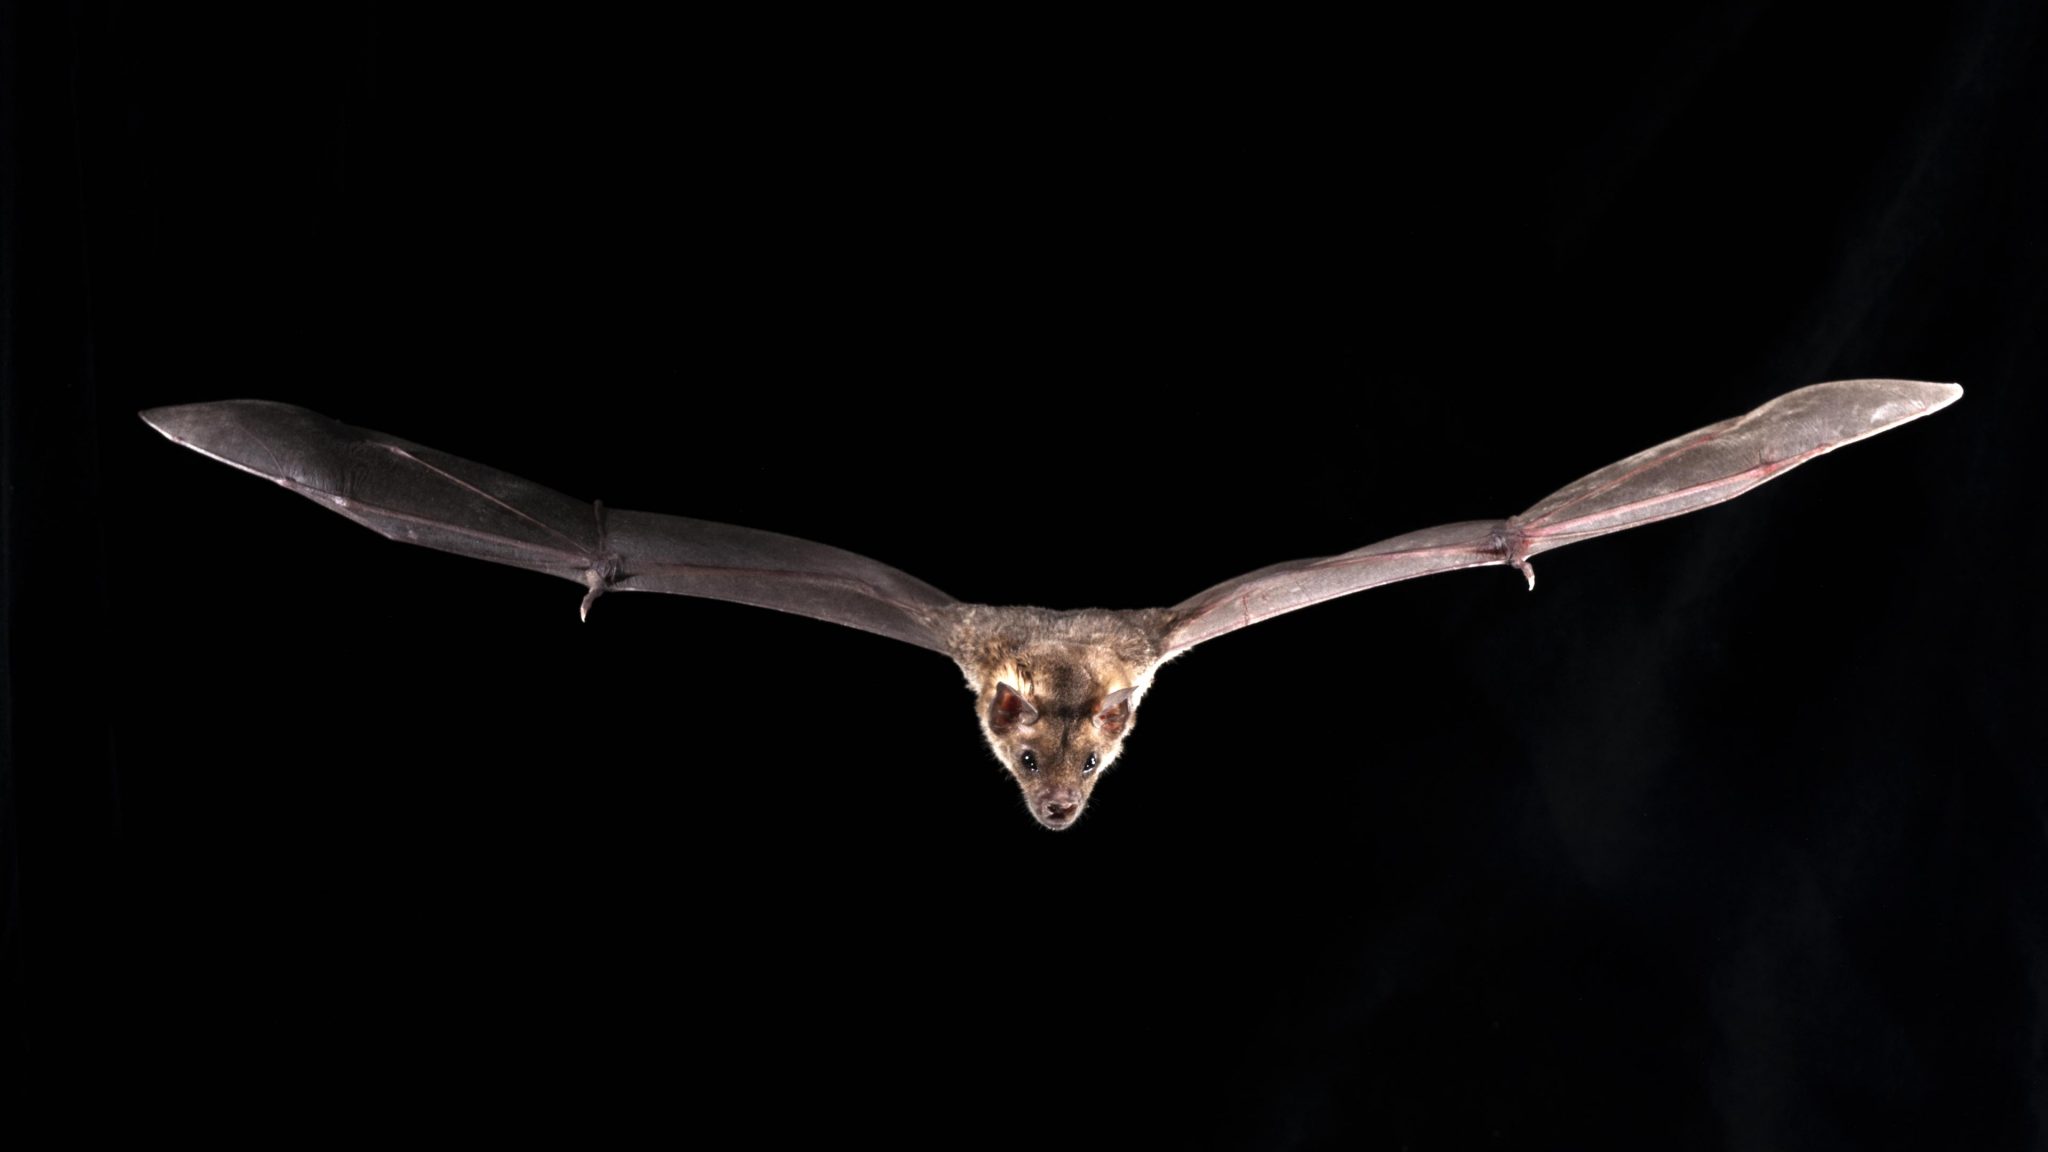 Genetics of bat superpowers revealed: How they fly, survive deadly viruses, resist aging & cancer